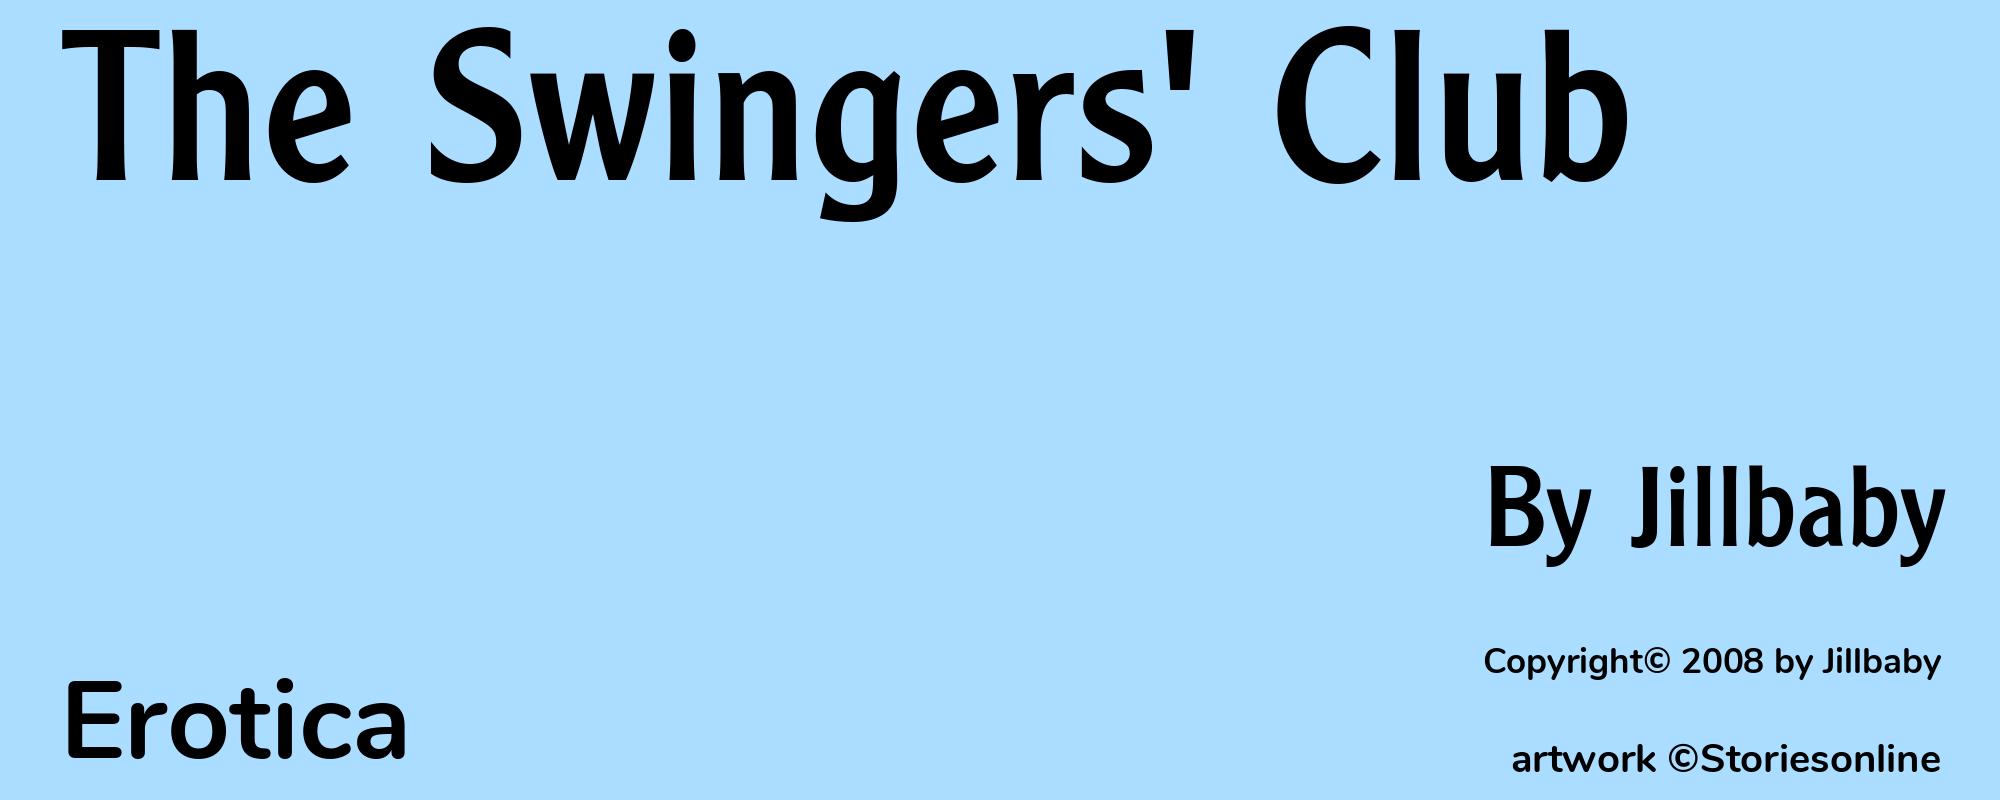 The Swingers' Club - Cover